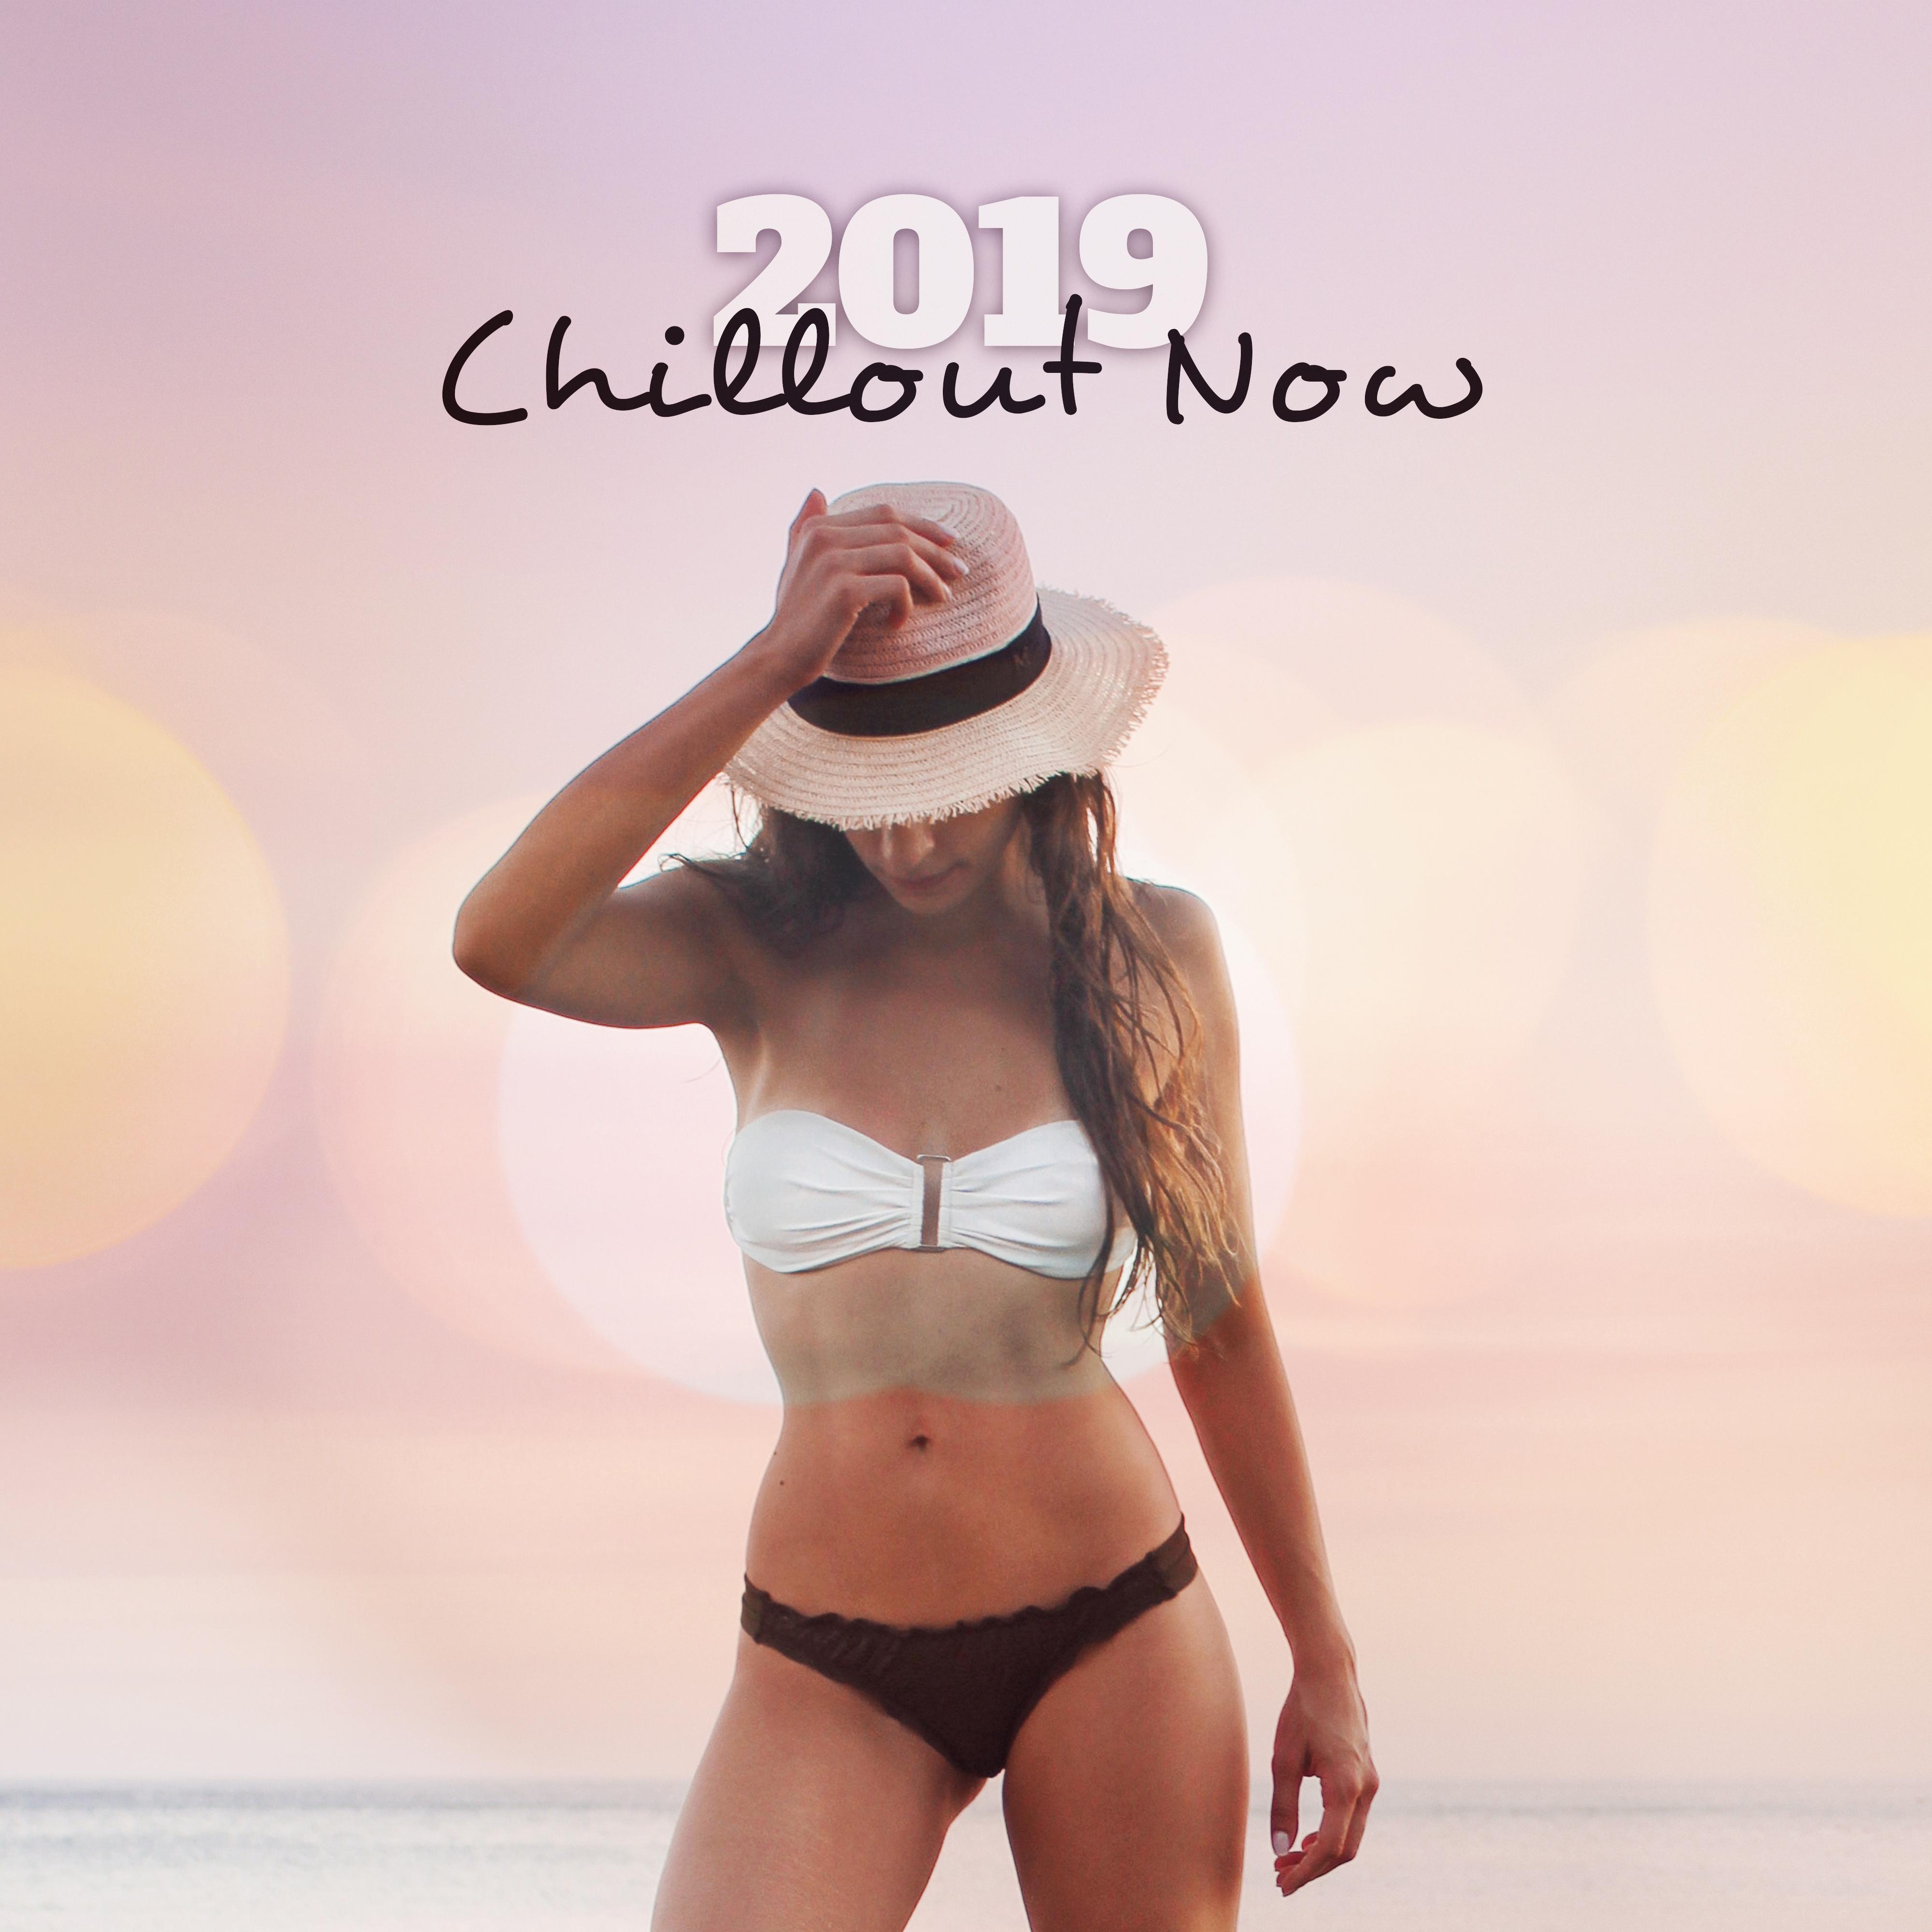 2019 Chillout Now: Summertime 2019, Ibiza Lounge, Relax, Chill, Ibiza Chillout Tracks, Tropical Music to Calm Down